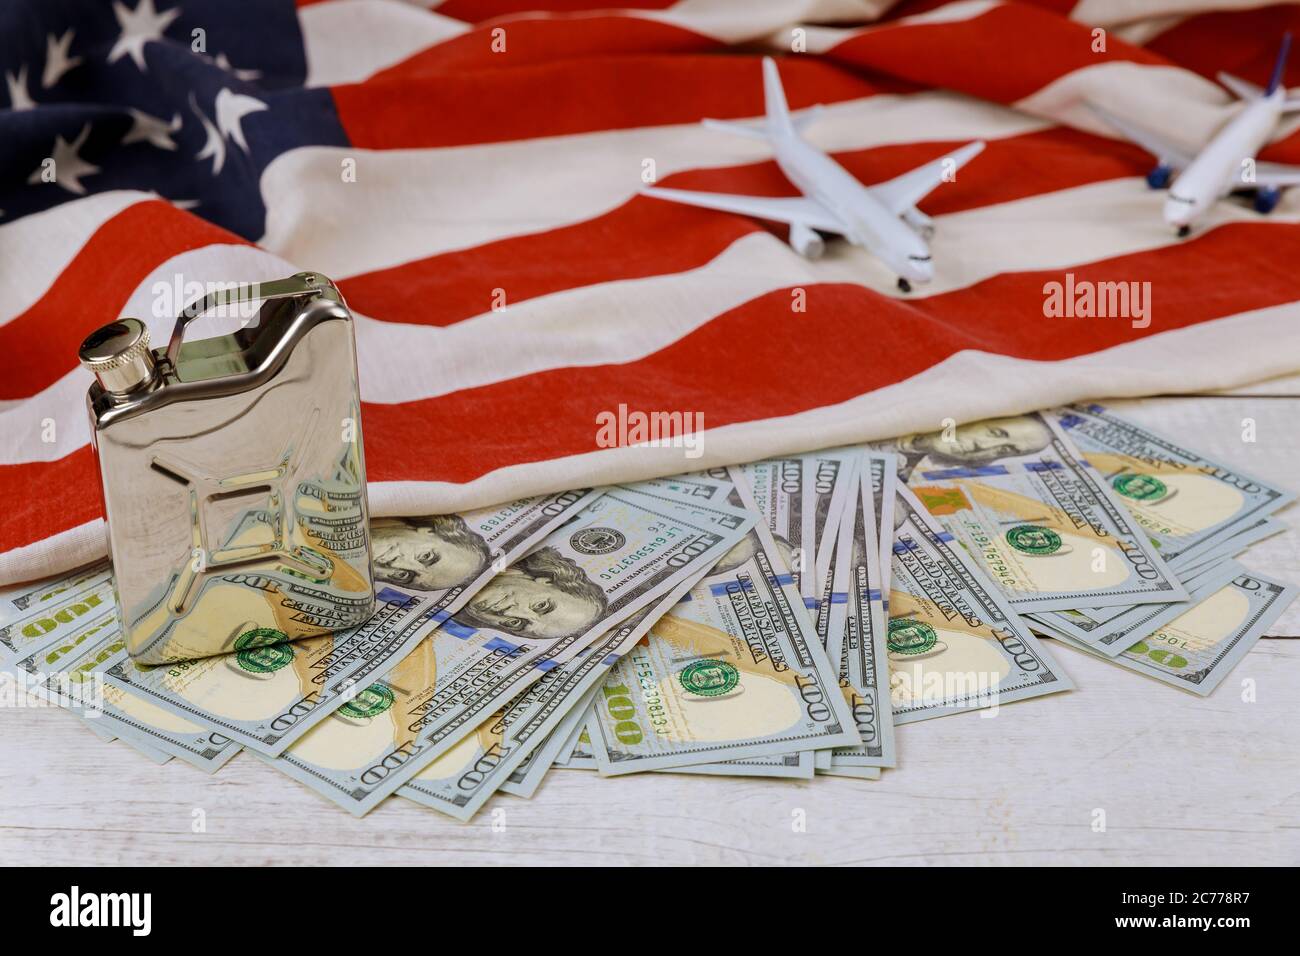 Petroleum products price on US dollar oil business, rising world oil prices brand USA flag model airplane Stock Photo